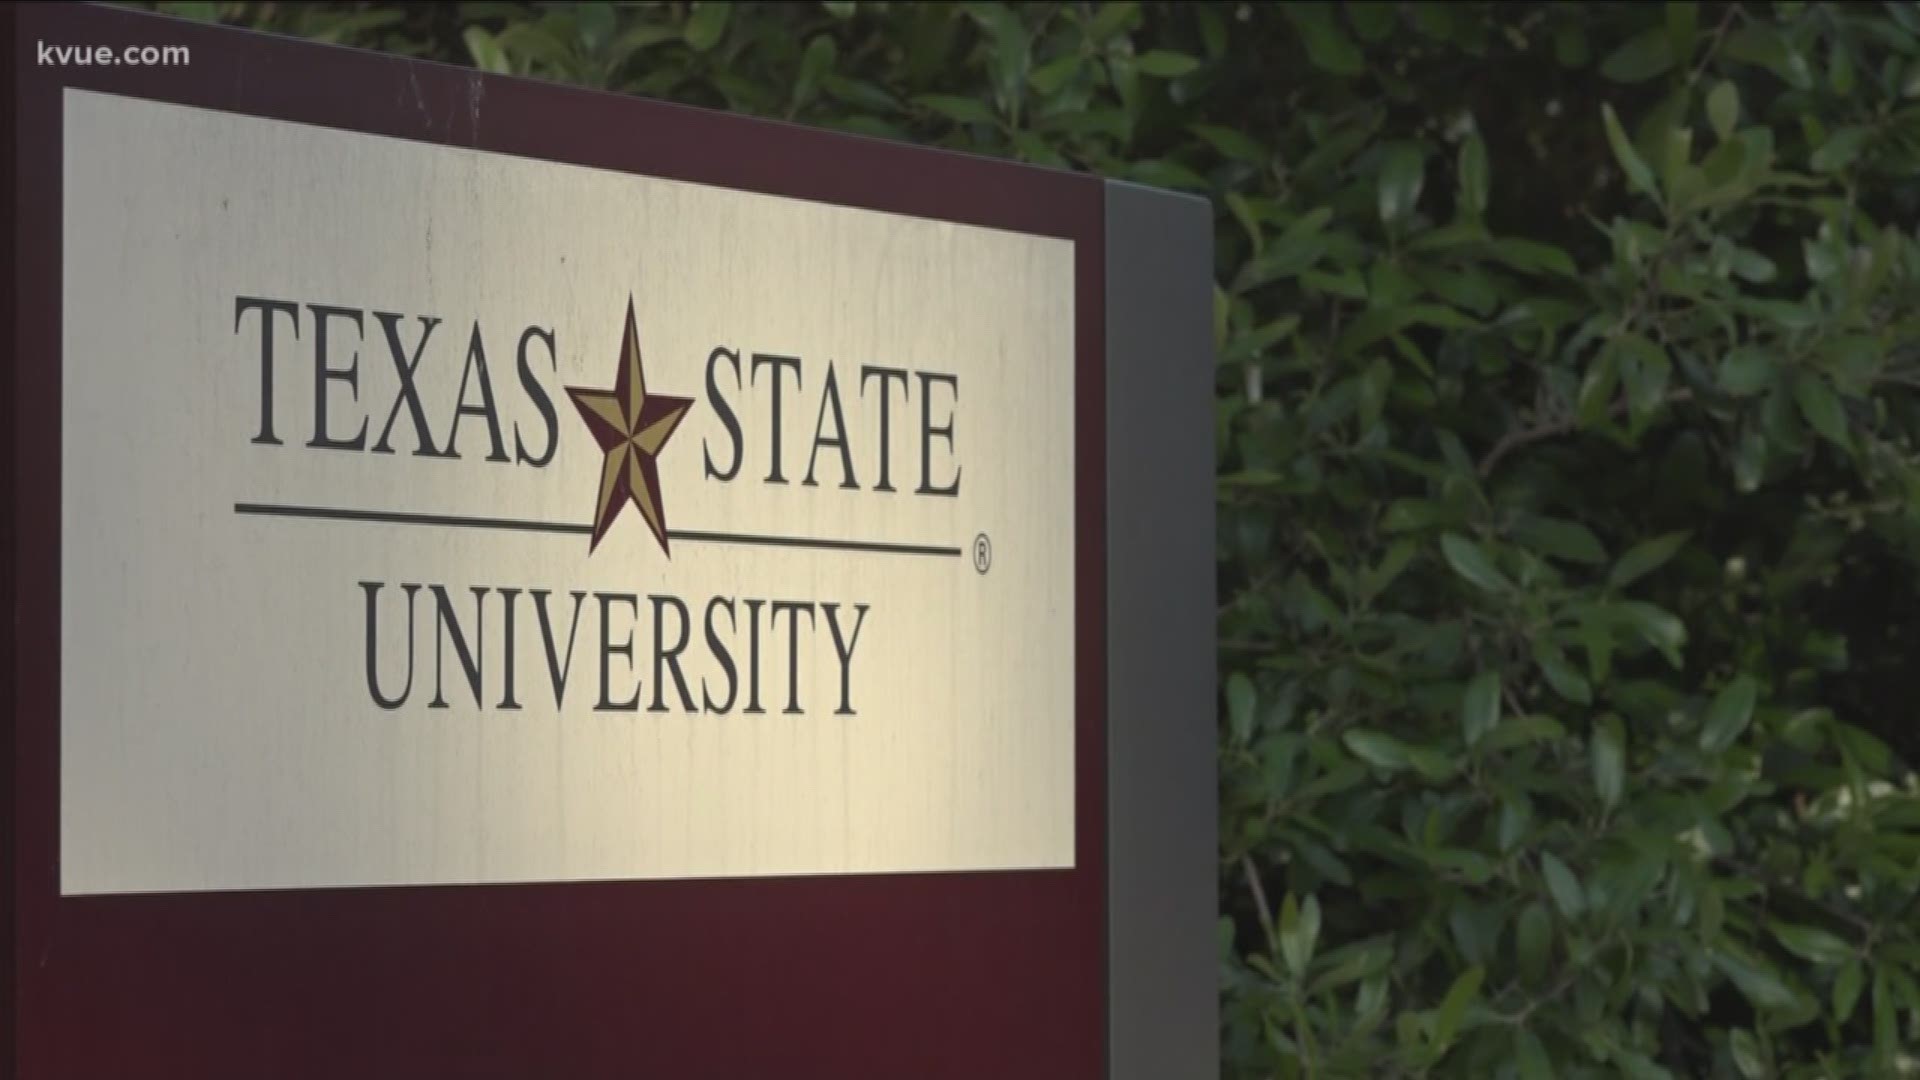 There's a new report claiming Texas State University in San Marcos dramatically under-reported sexual assaults on campus.